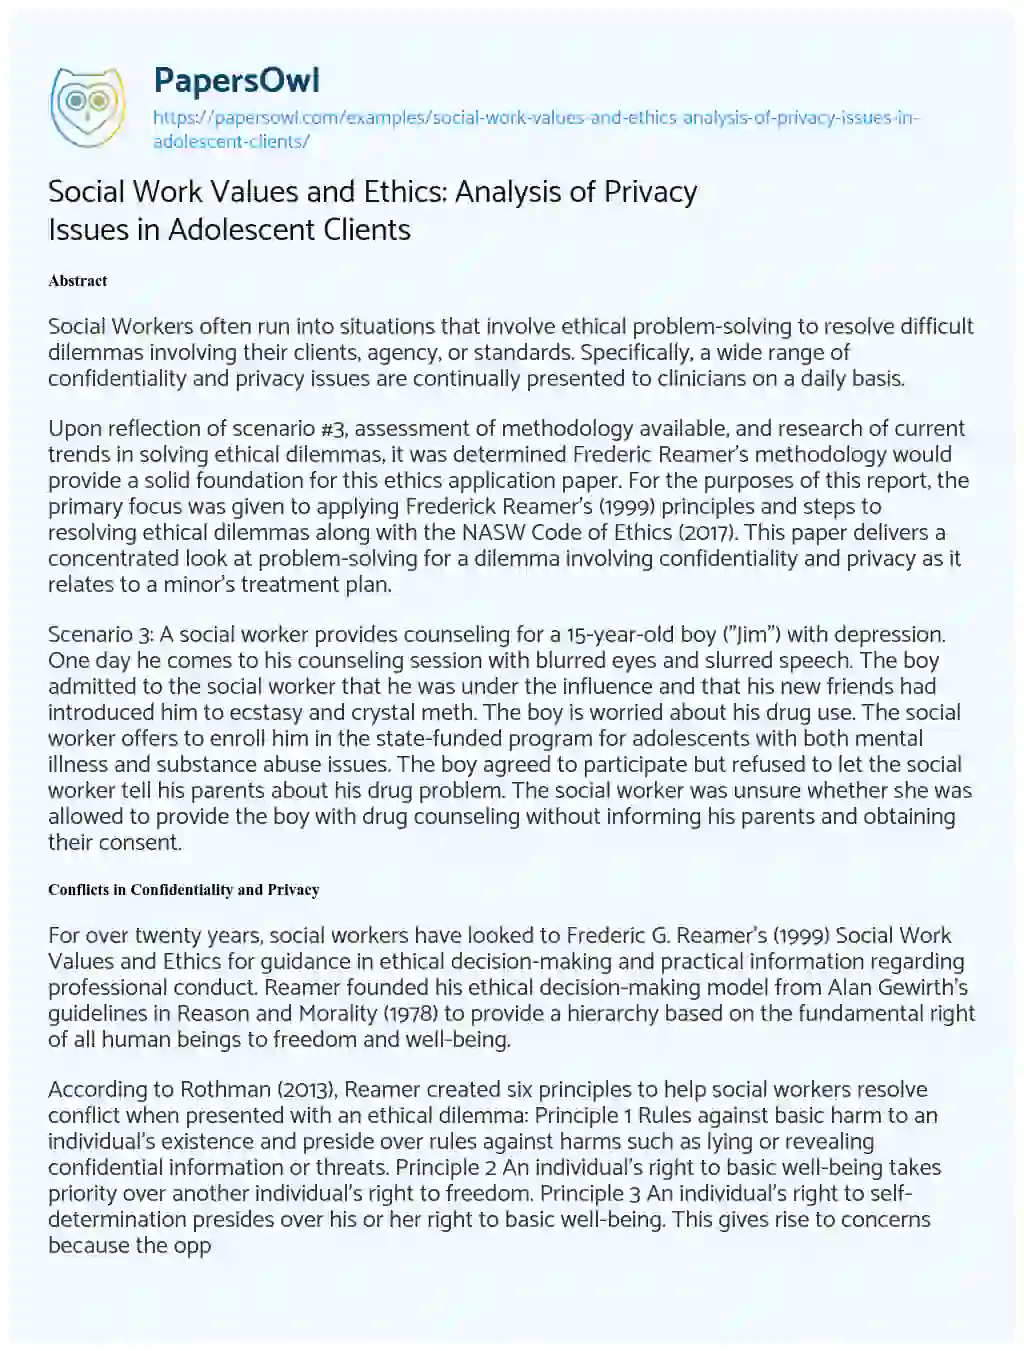 Essay on Social Work Values and Ethics: Analysis of Privacy Issues in Adolescent Clients